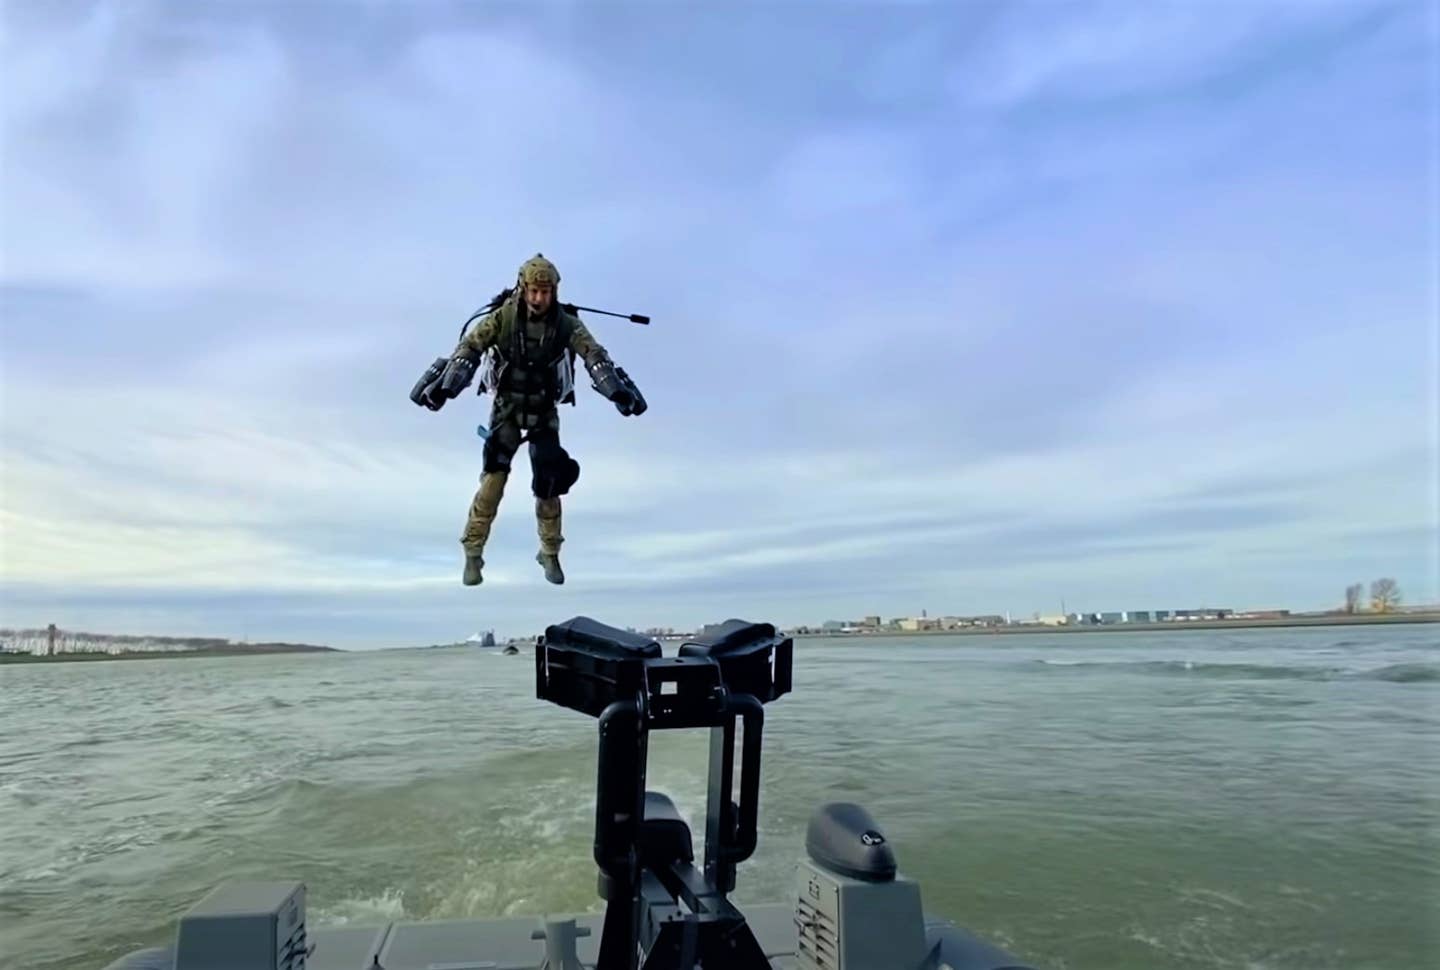 Watch this special operator lead a ship assault with a jetpack like Iron Man